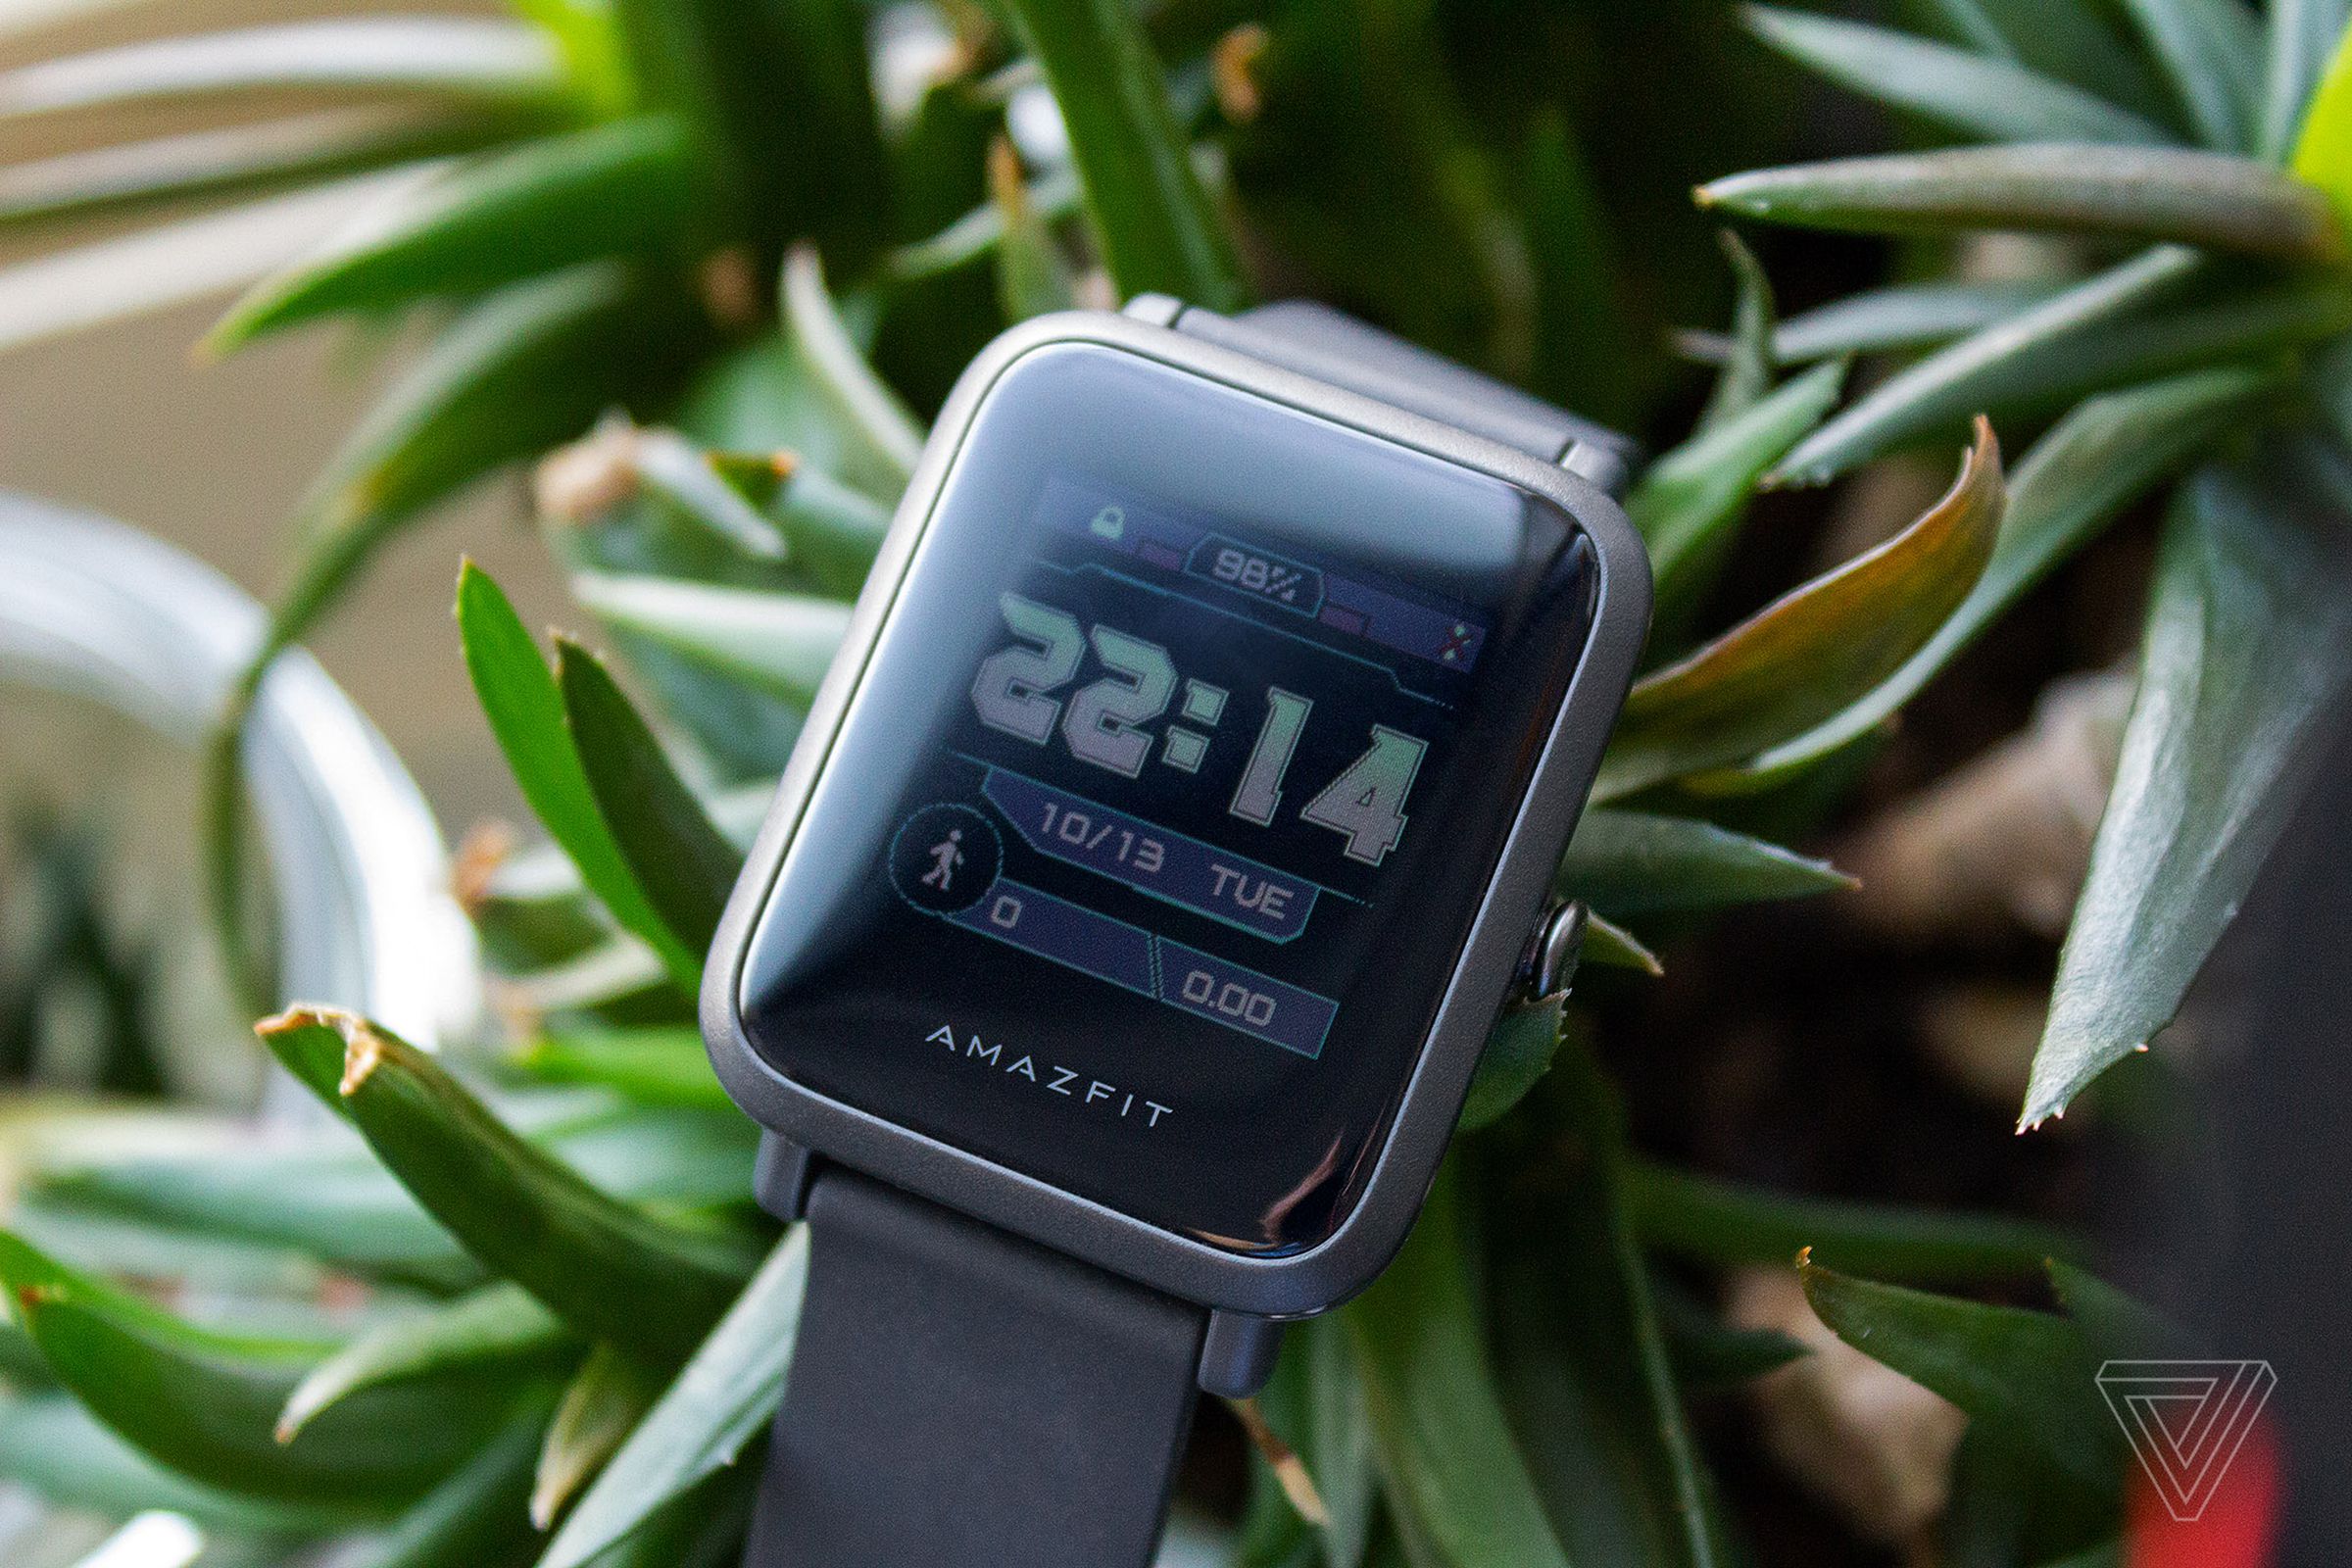 The Amazfit Bip S offers more features than you’d expect for $70.